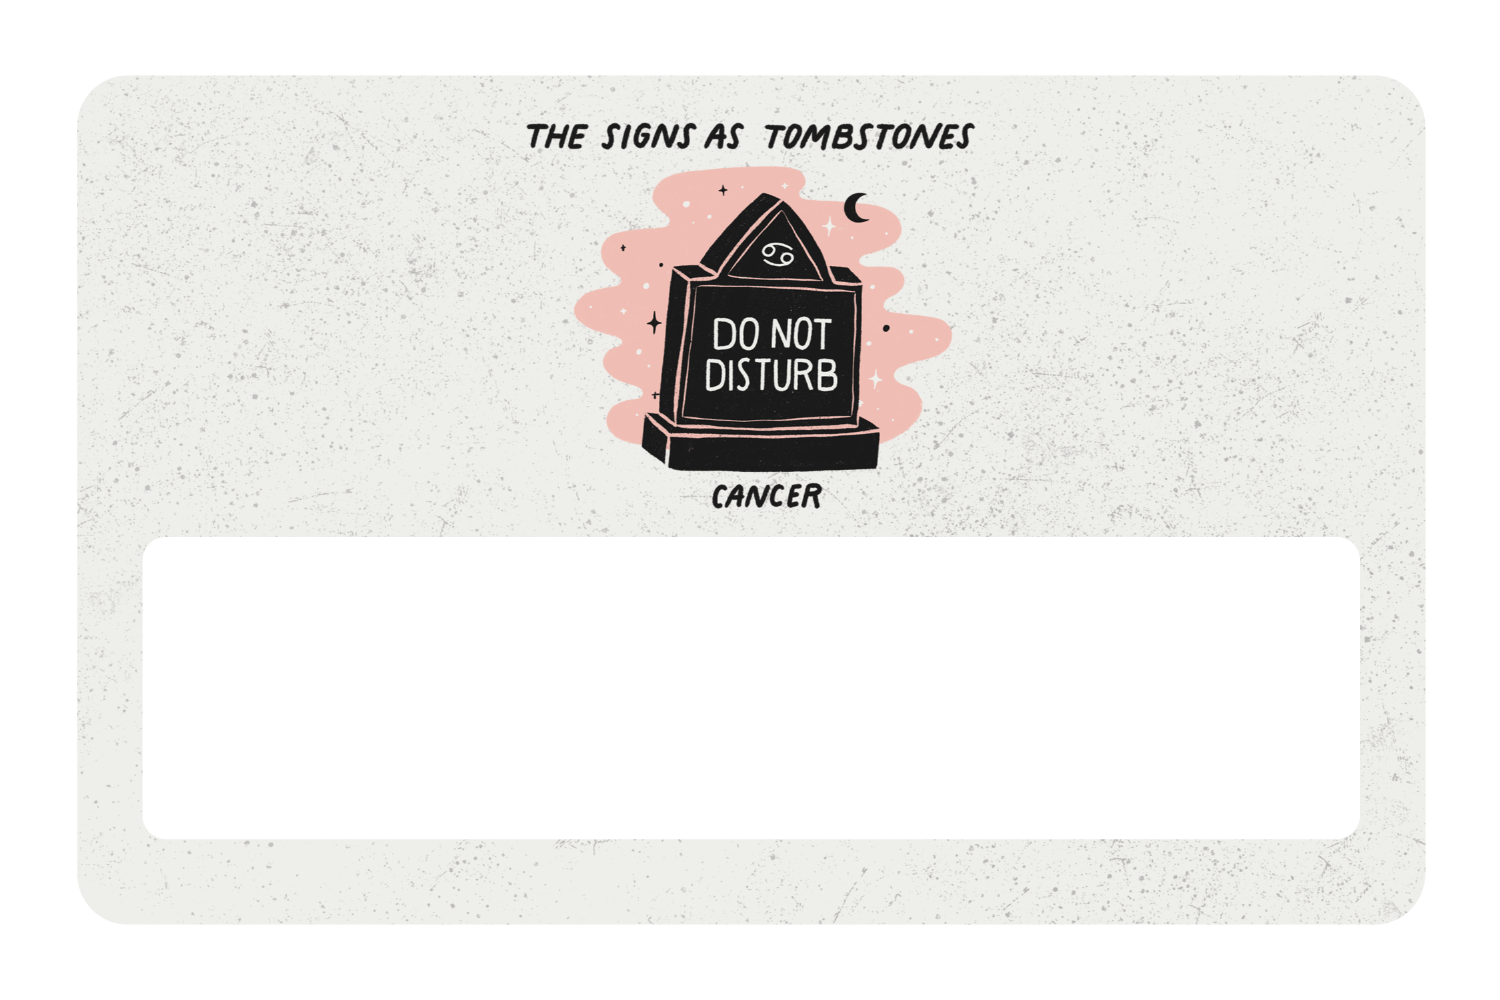 Cancer as a Tombstone